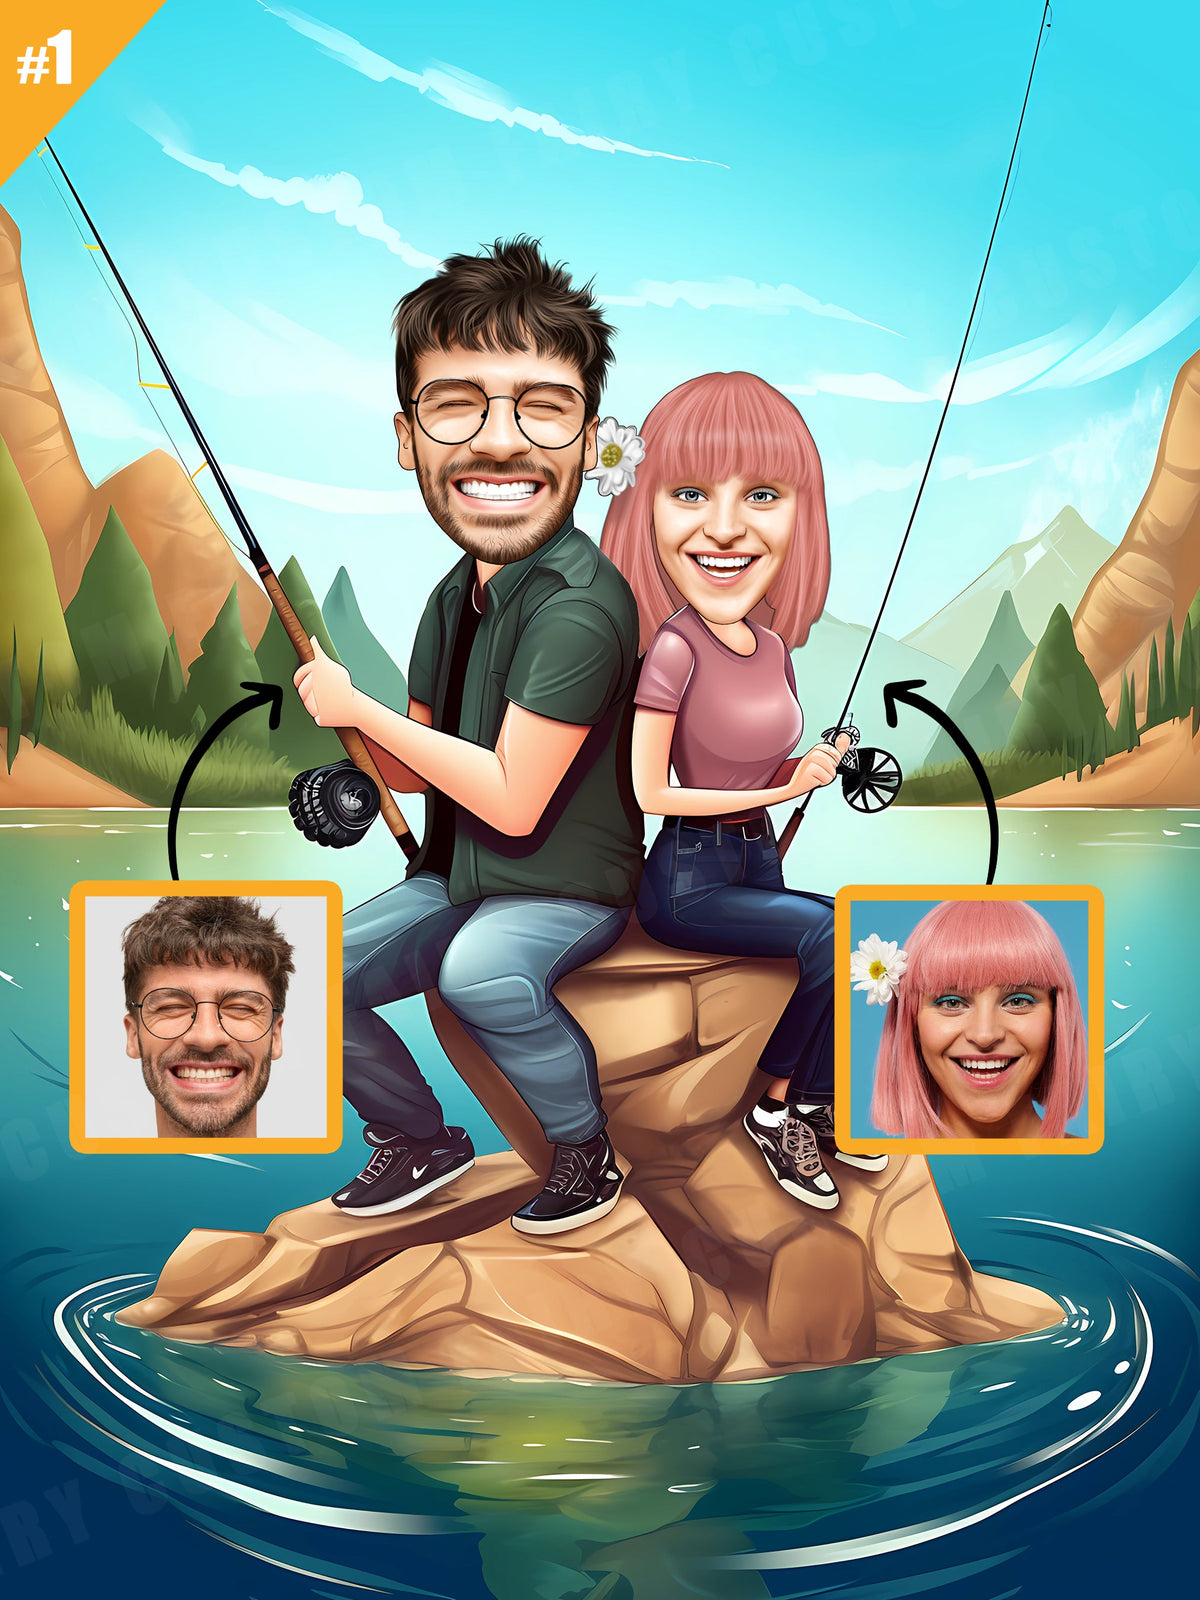 Personalized Caricature Gift of a Fishing Couple